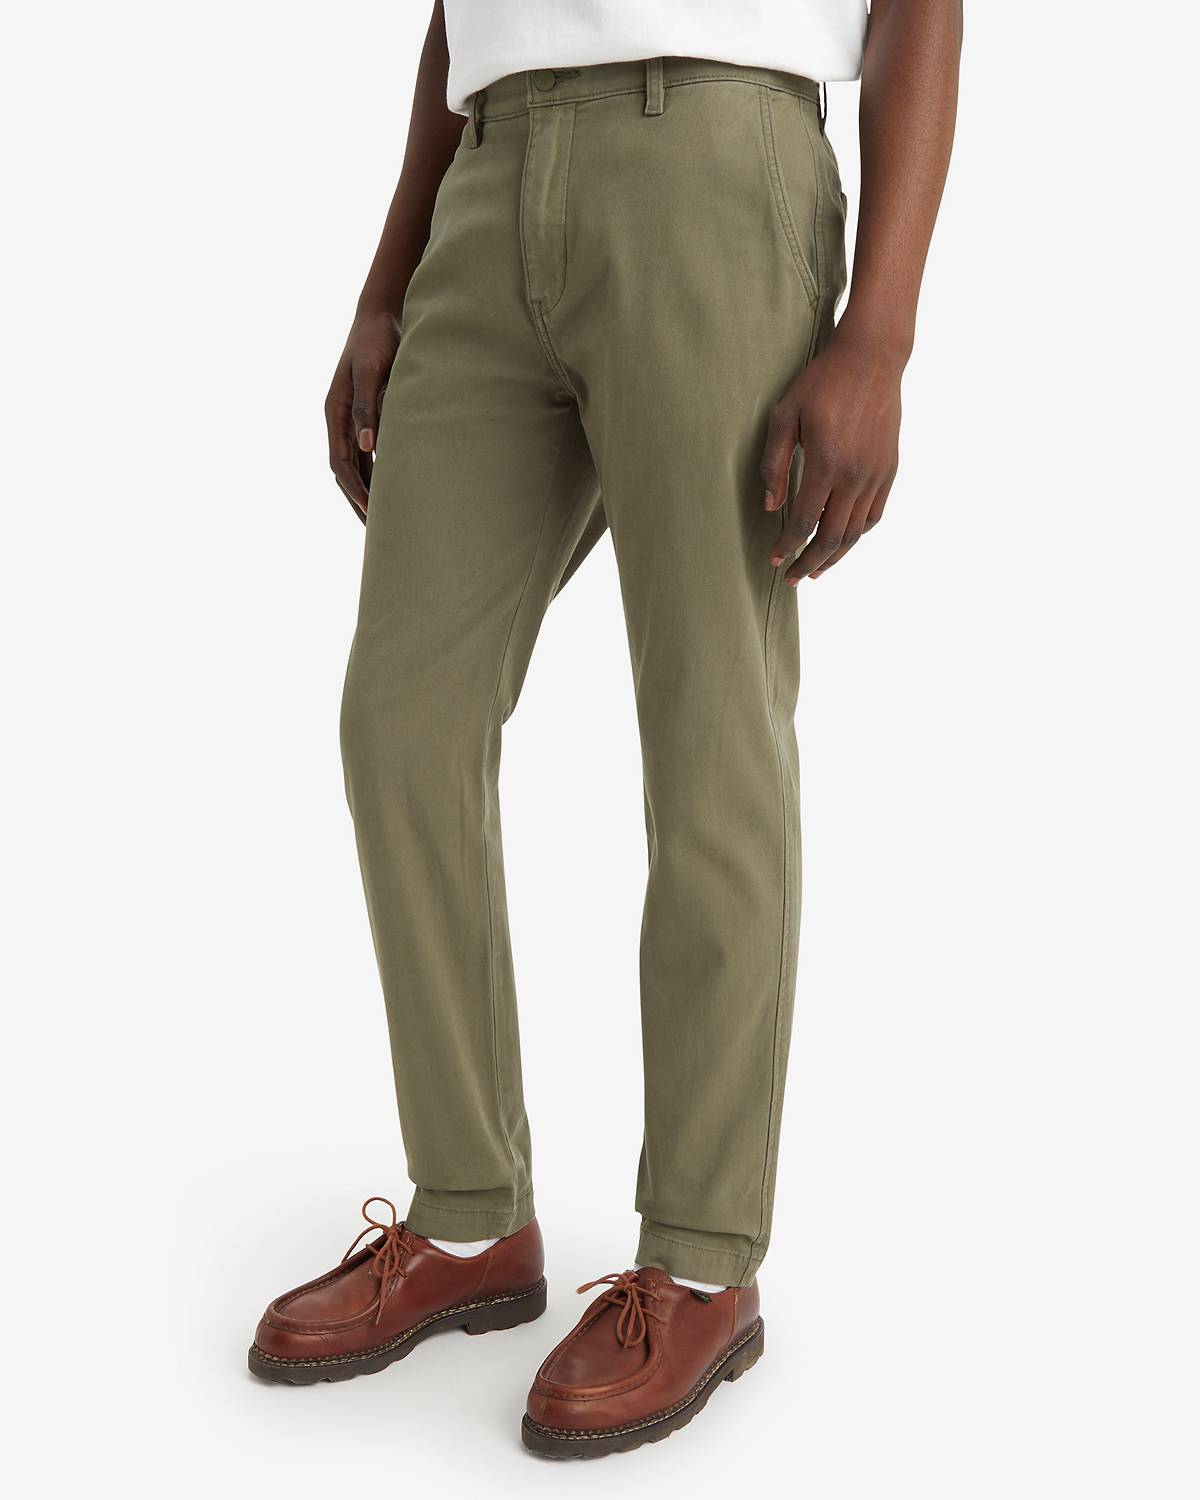 white luxury Slim Fit Men Light Green Trousers - Buy white luxury Slim Fit  Men Light Green Trousers Online at Best Prices in India